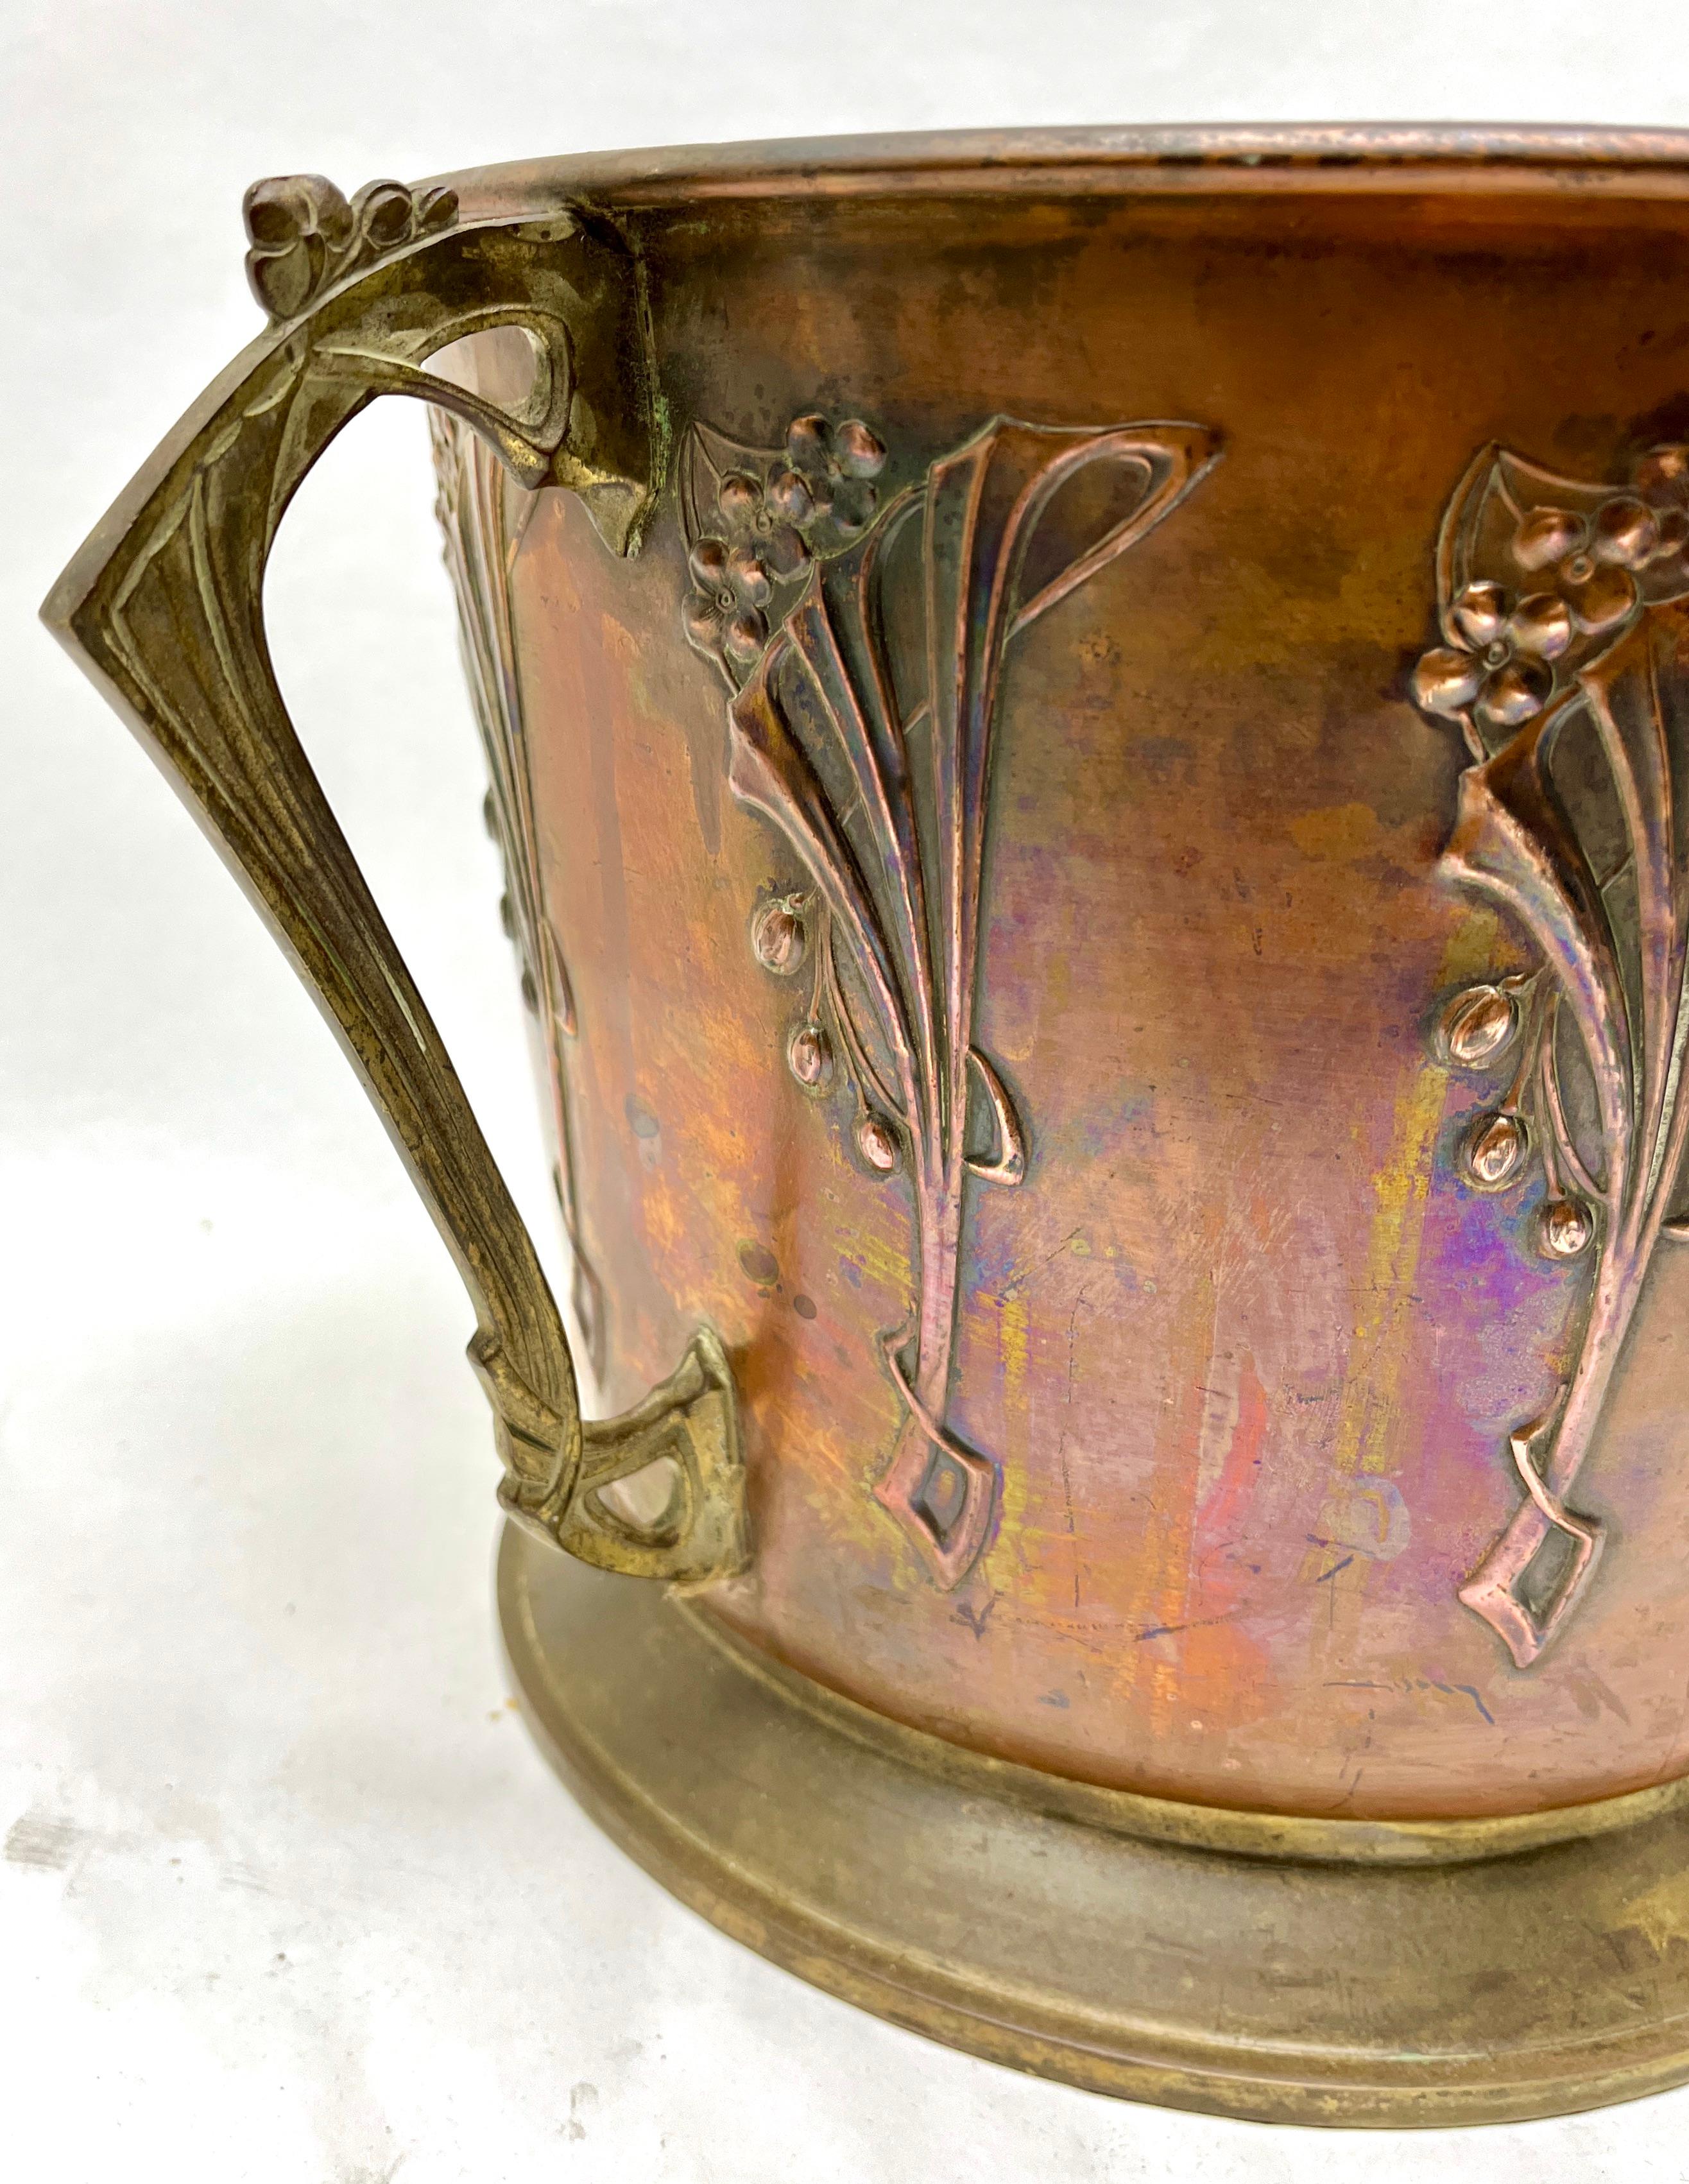 Hand-Crafted Style WMF Art Nouveau Brass and Copper Flowerpot with Levers and Organic Details For Sale